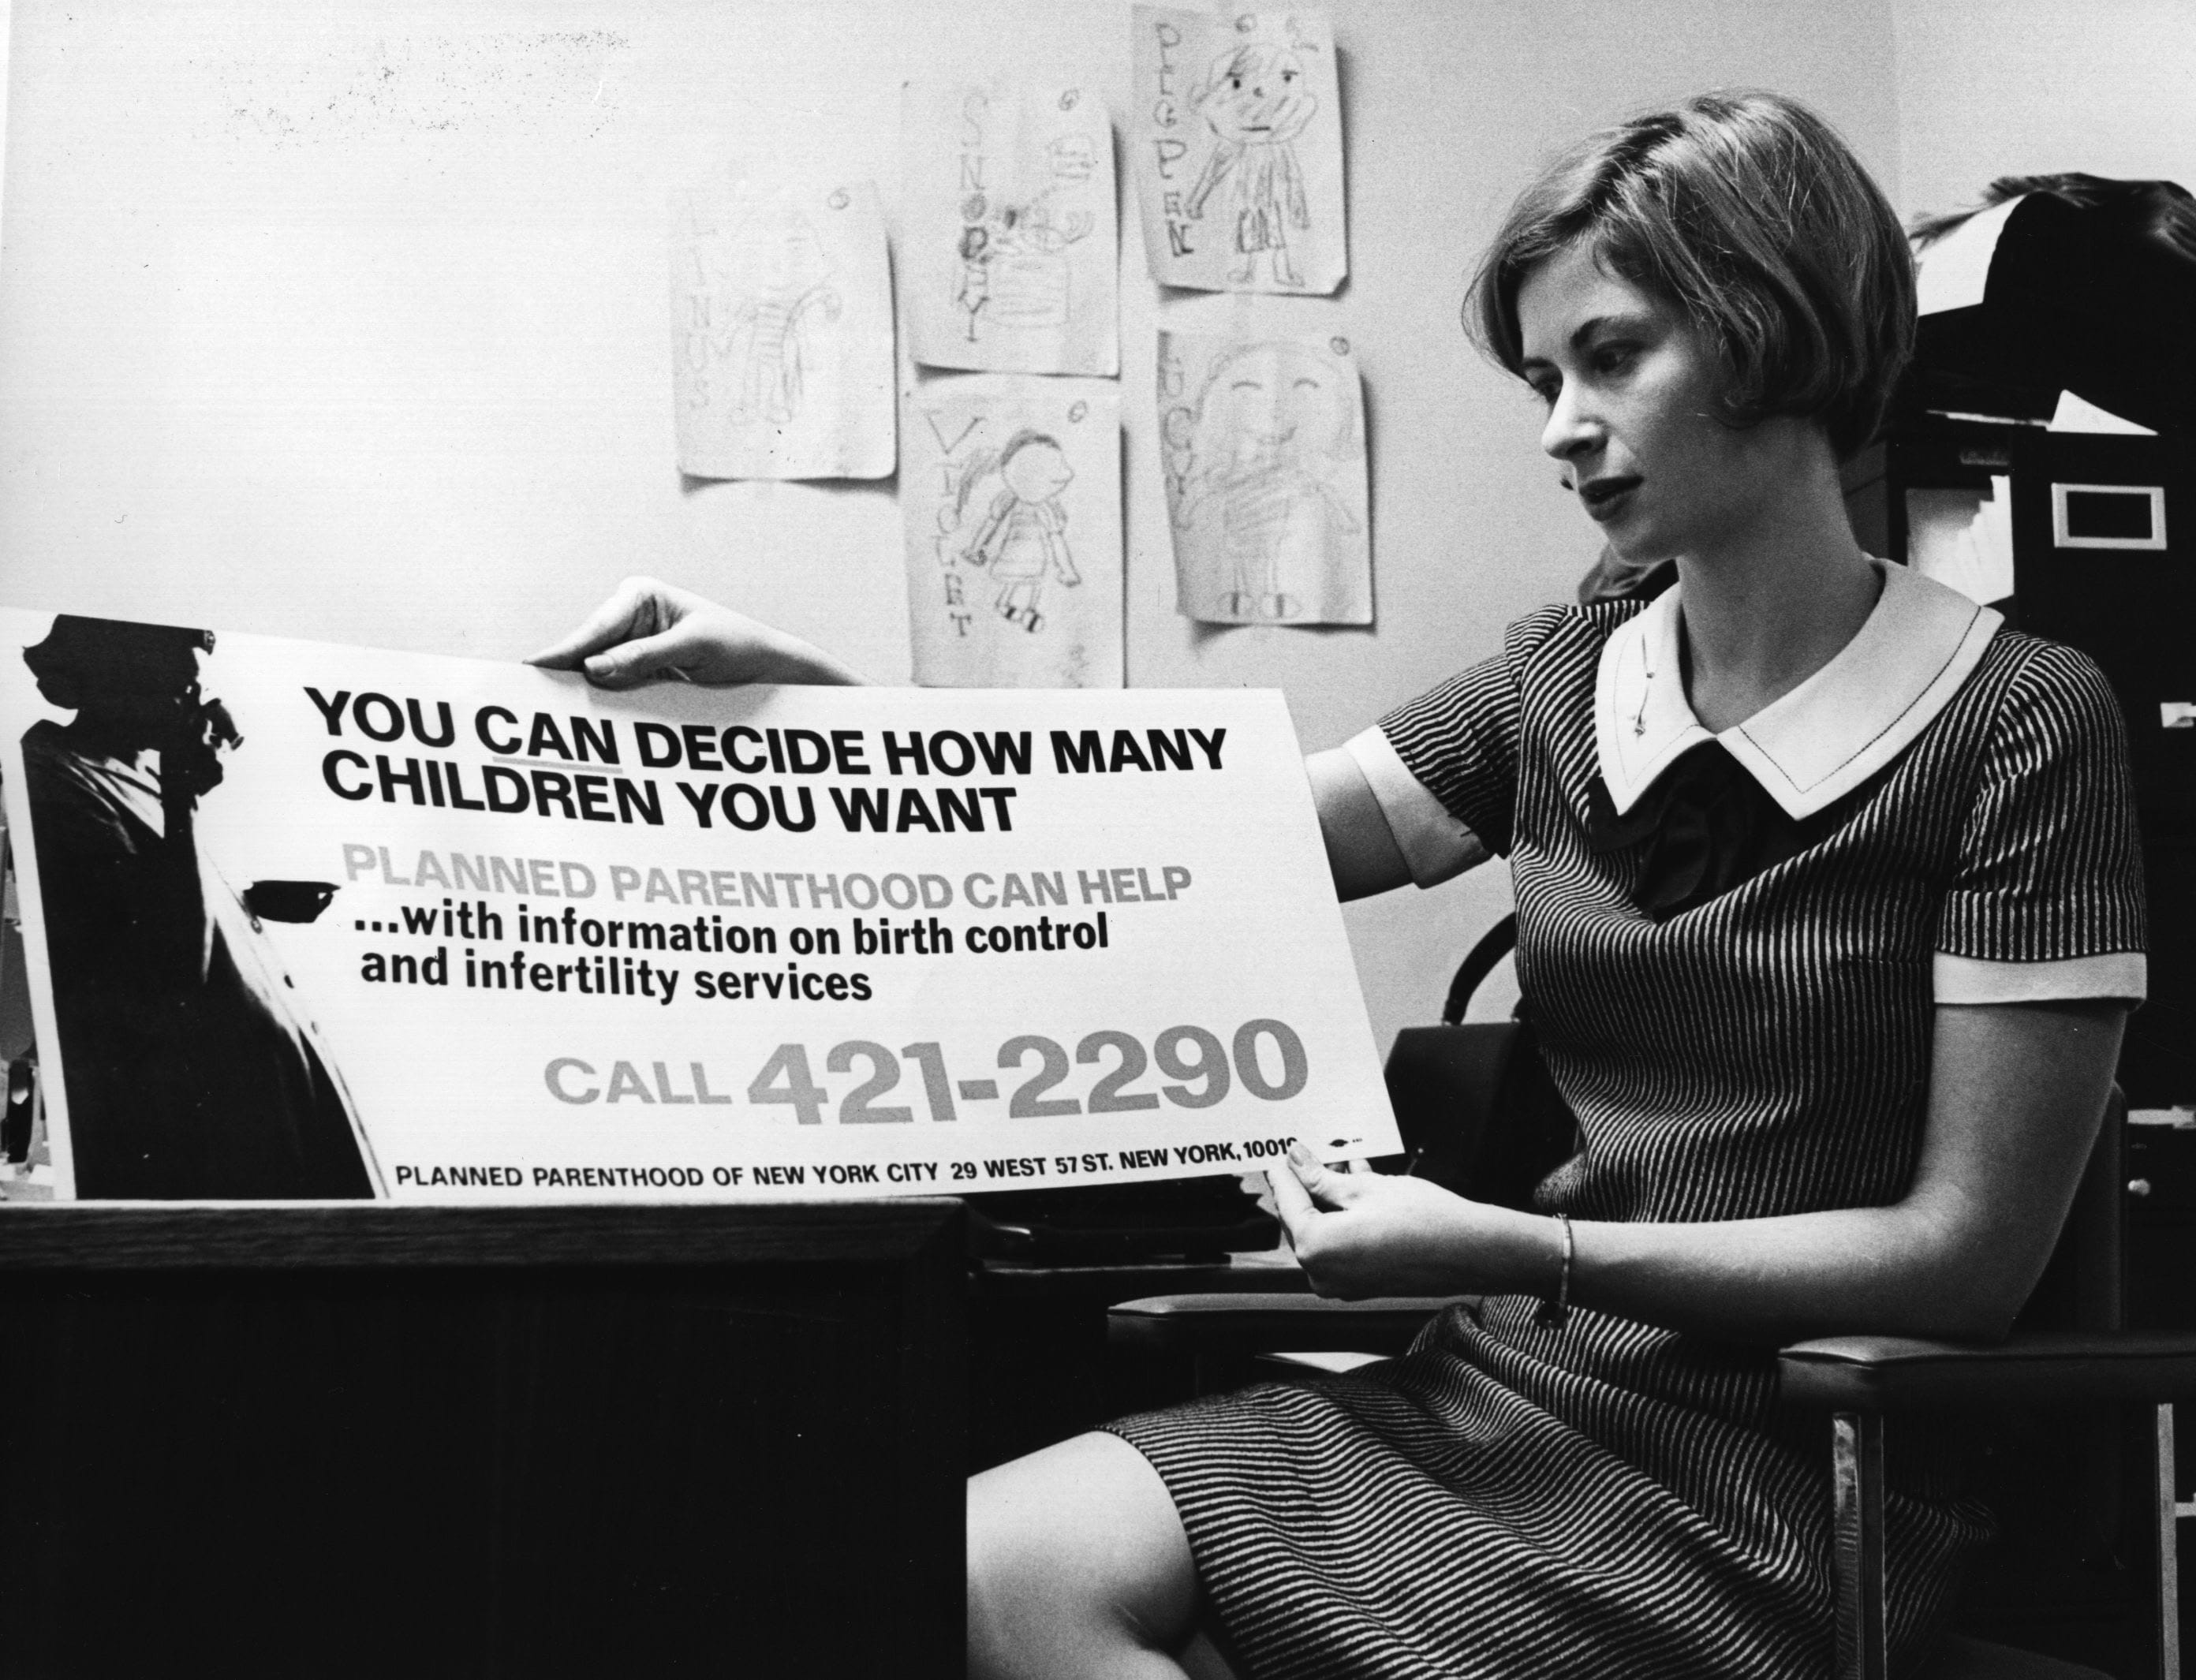 A black and white photo of a white person with a short bob wearing a dress holding an advertisement for Planned Parenthood.